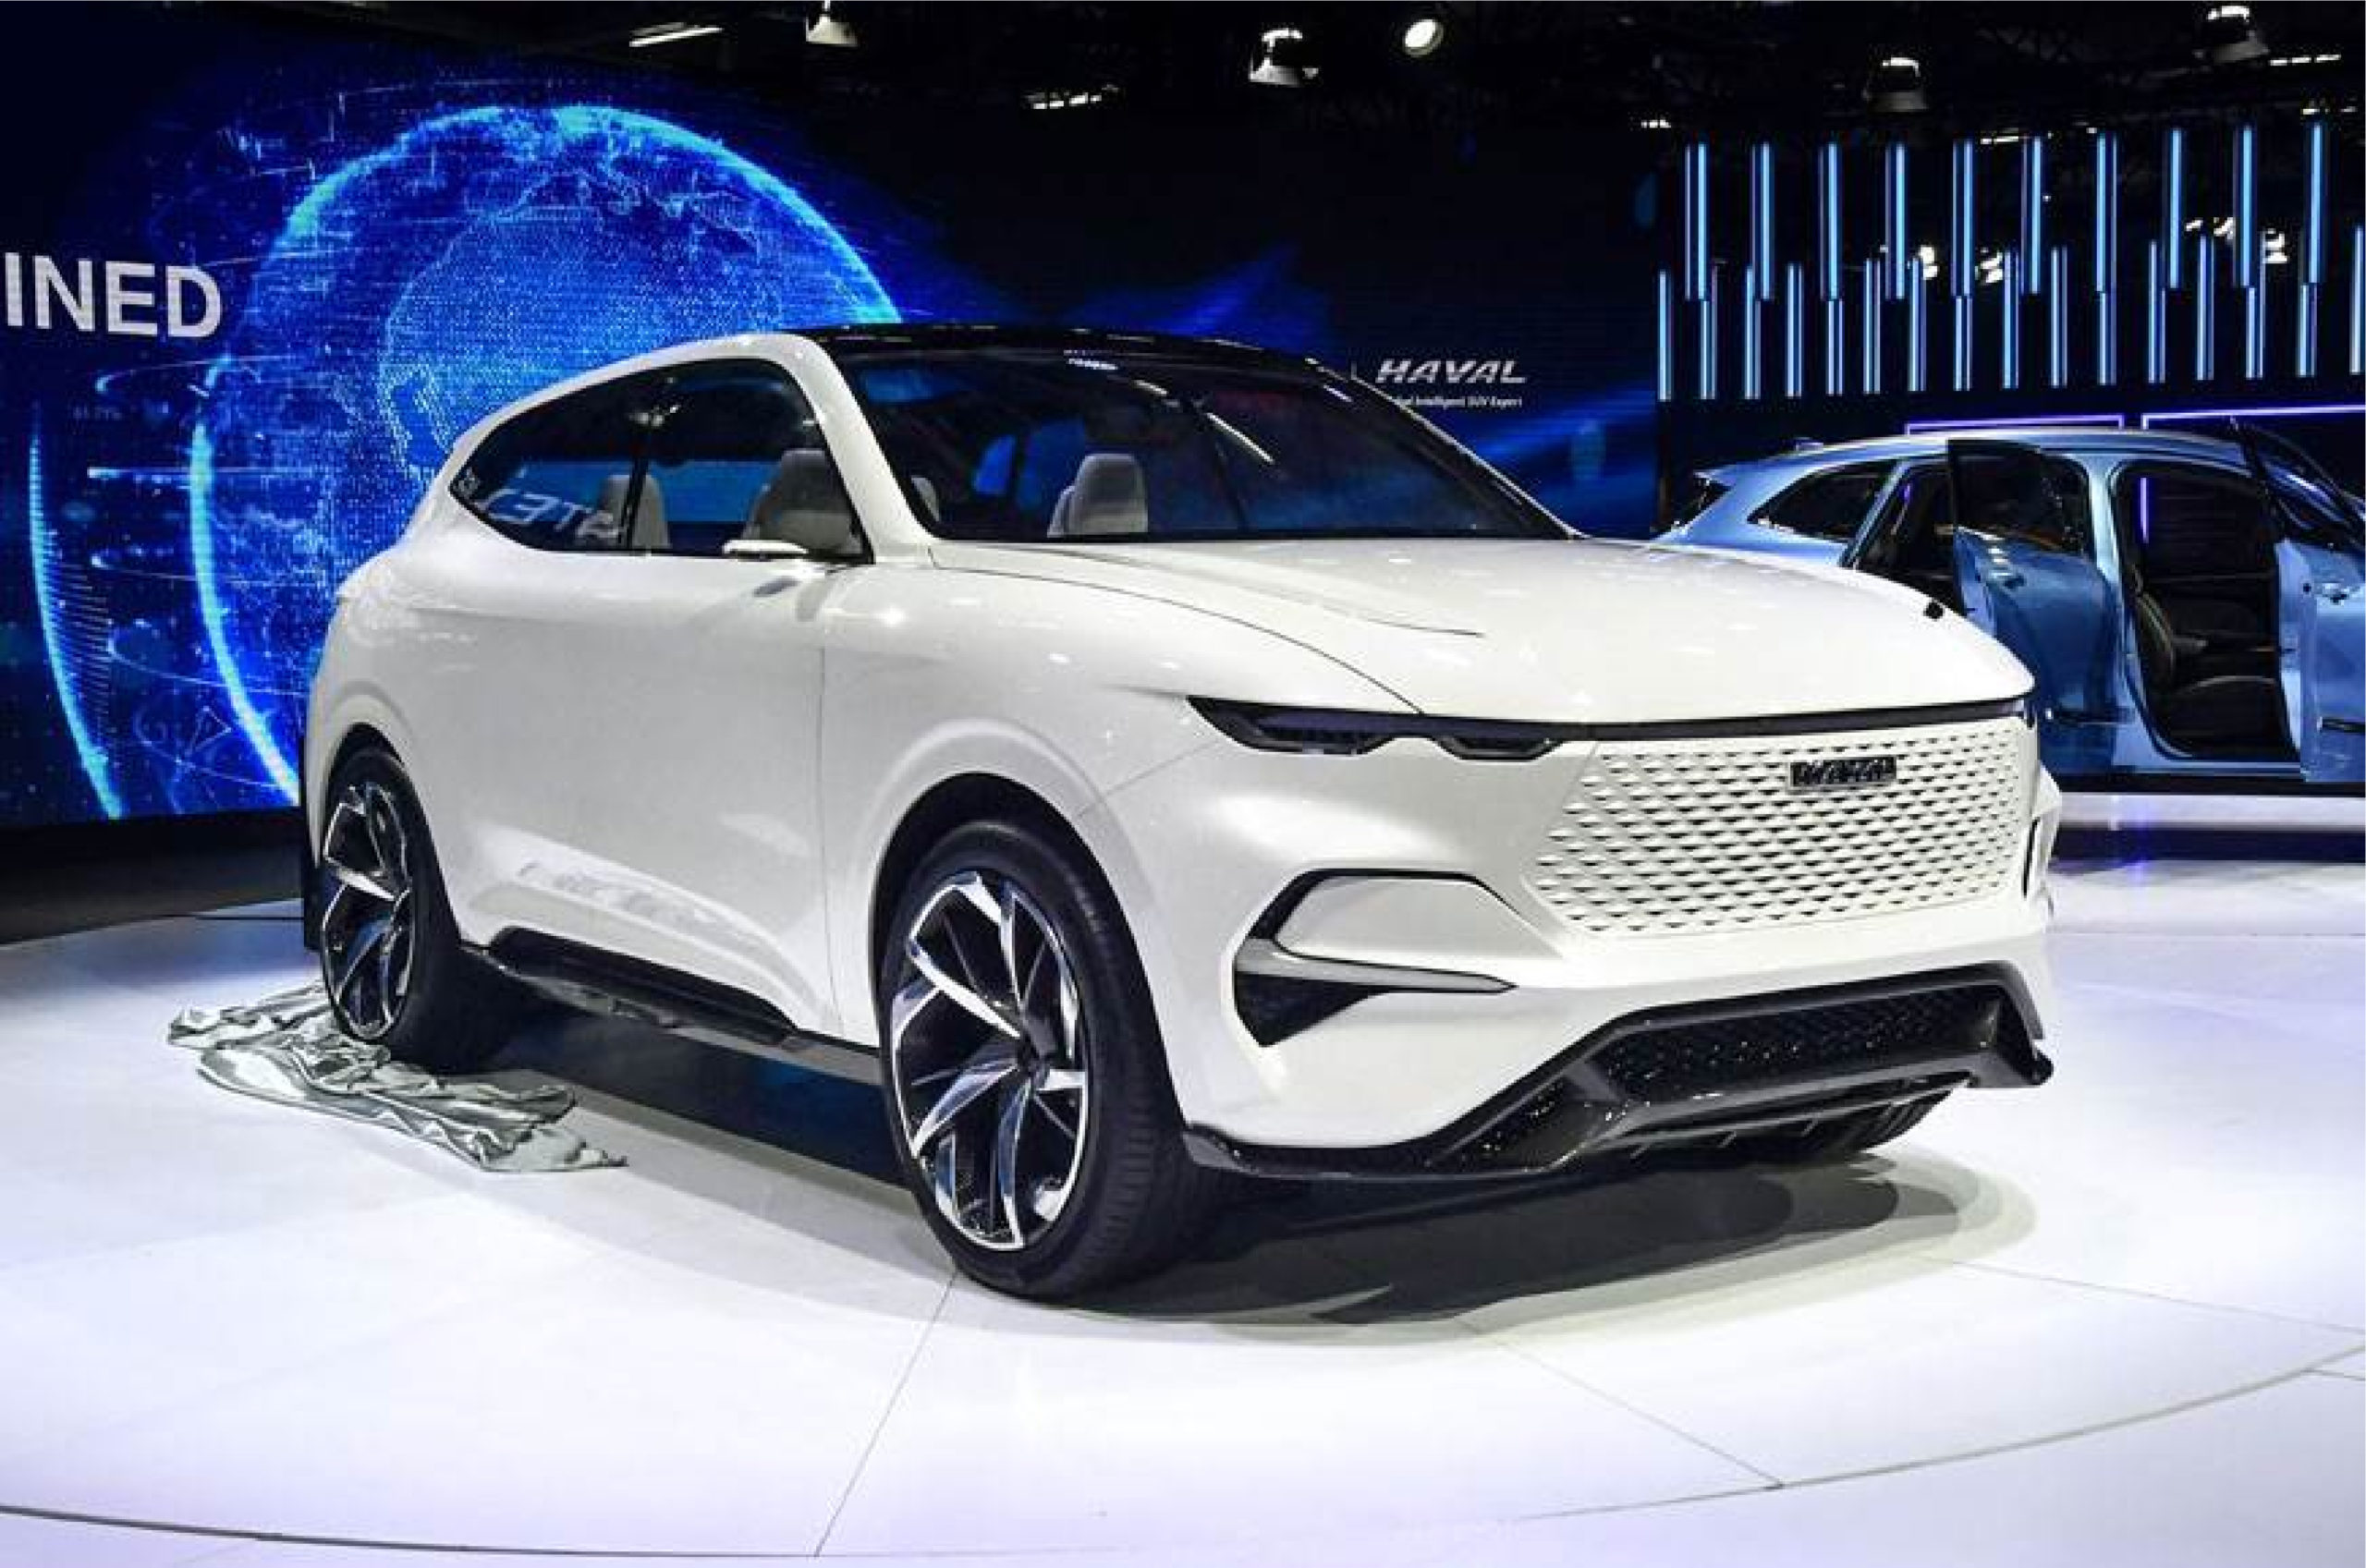 haval vision 2025, haval vision 2025 prototipo, haval vision 2025 concepto, haval vision 2025 concept car, haval vision 2025 diseño, haval vision 2025 modelo de concepto, haval vision 2025 great wall motor, haval vision 2025 india, haval vision 2025 electric car, haval vision 2025 suv grande, haval vision 2025 technology